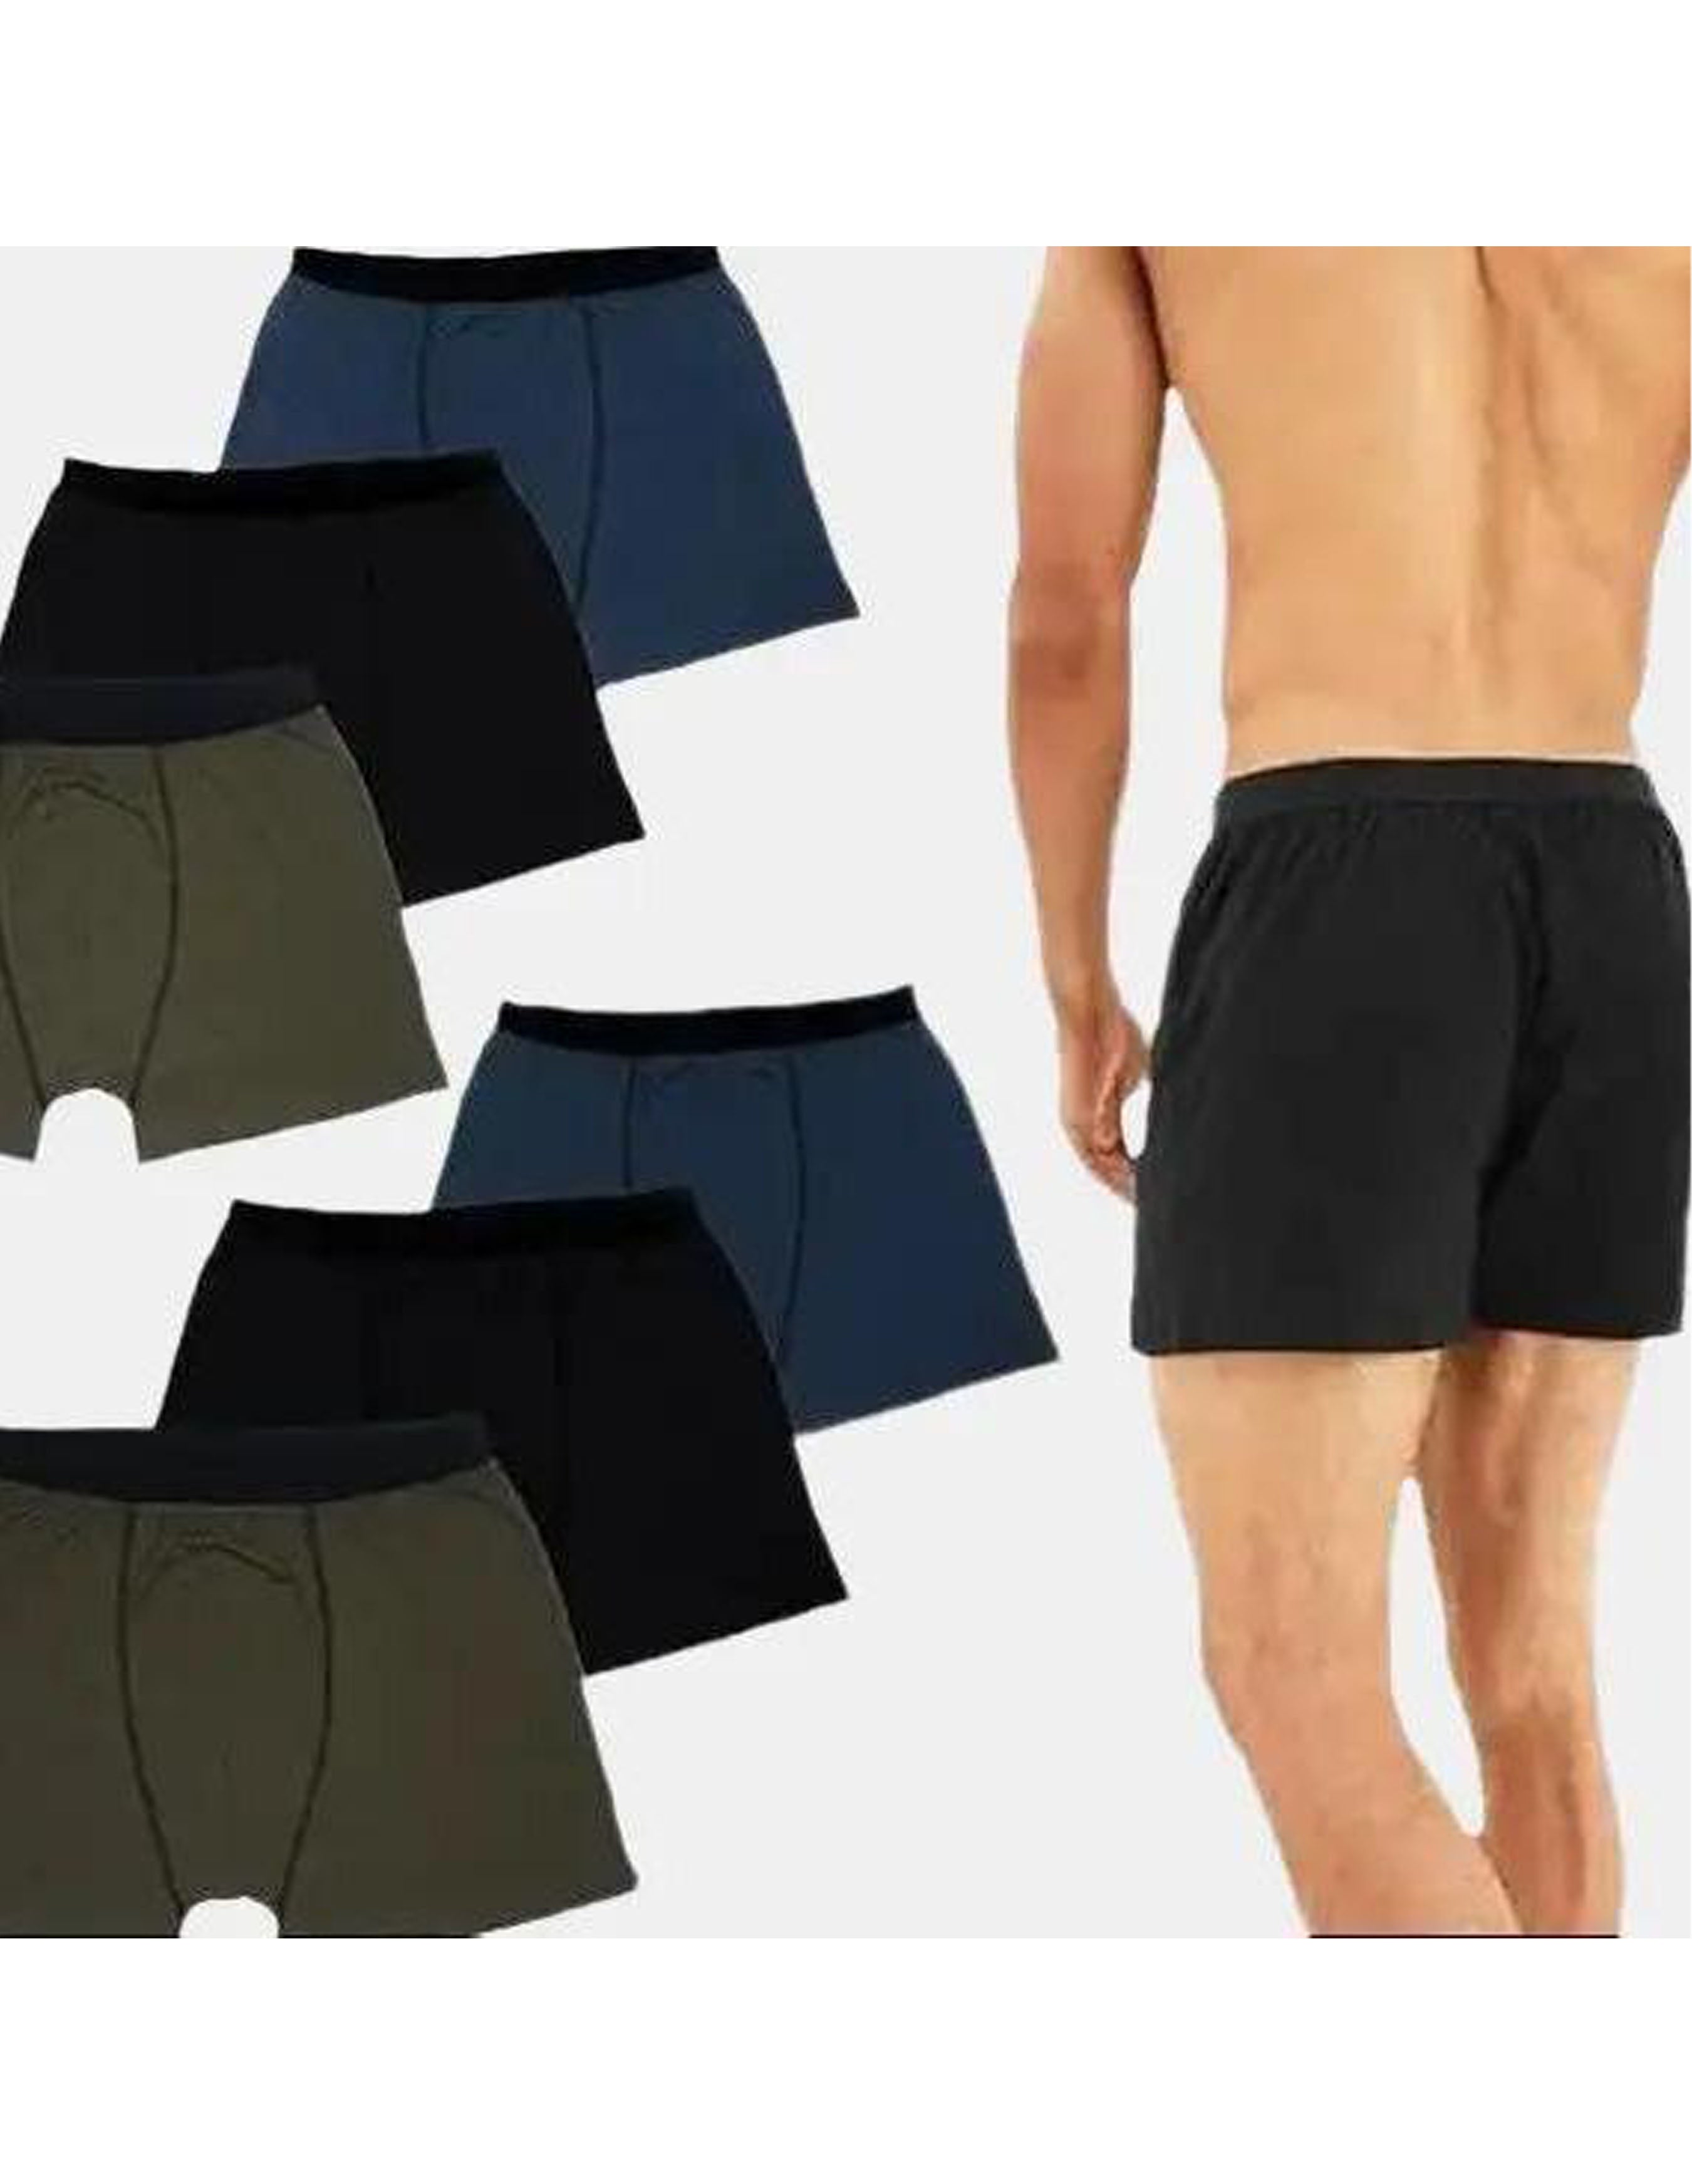 Bahob® Pack Of 6 Mens Plain Boxers with Elastic Waist Shorts